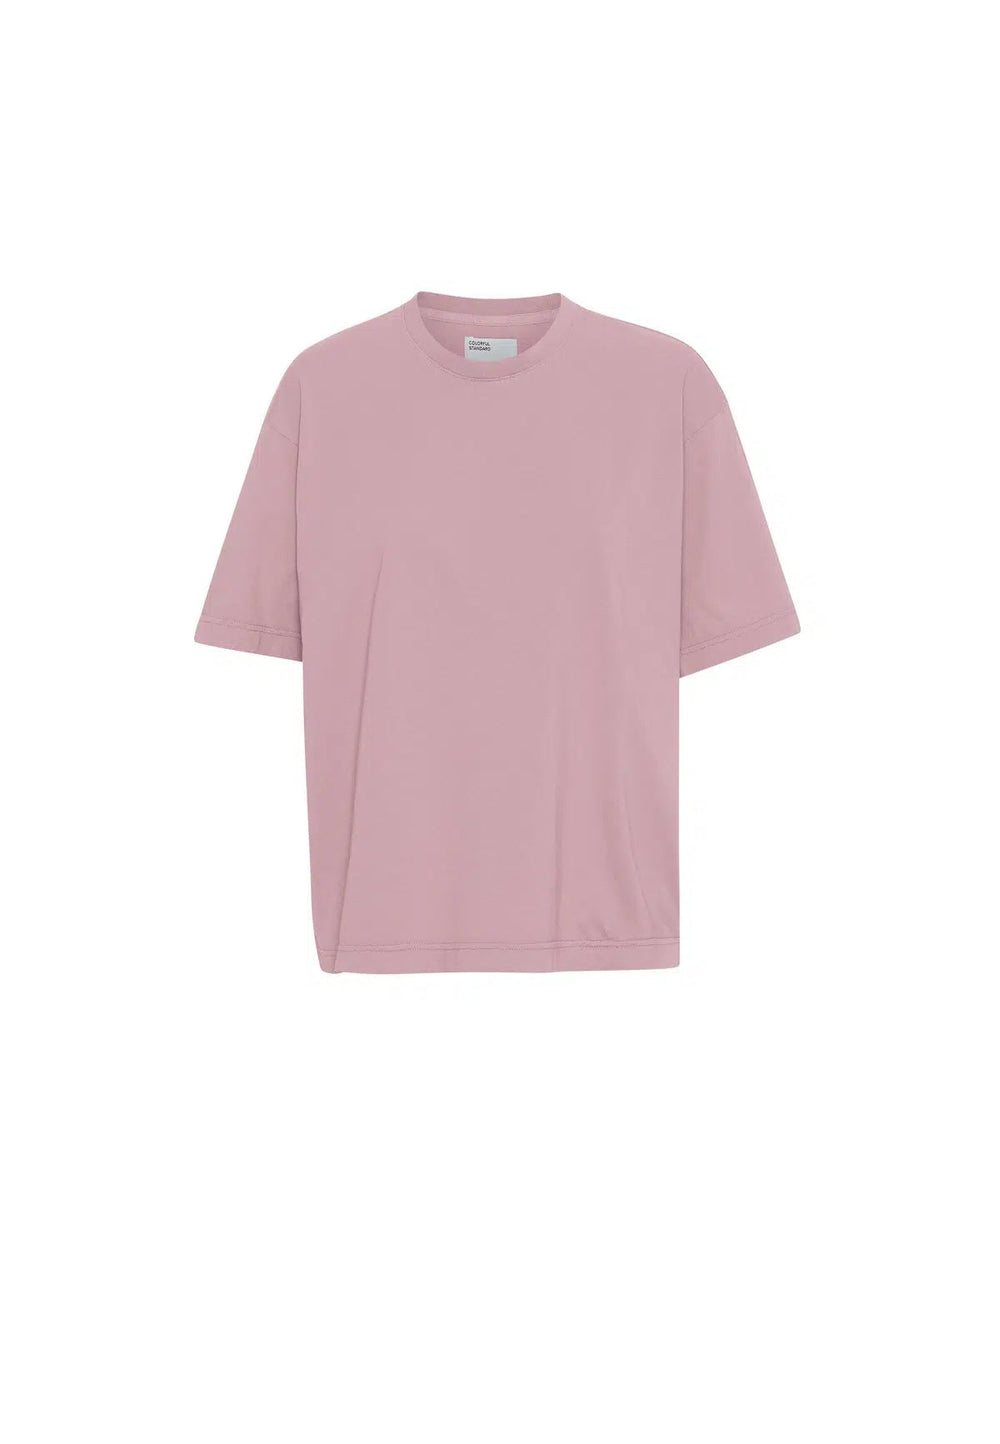 OVERSIZED T-SHIRT FADED PINK - Moeon